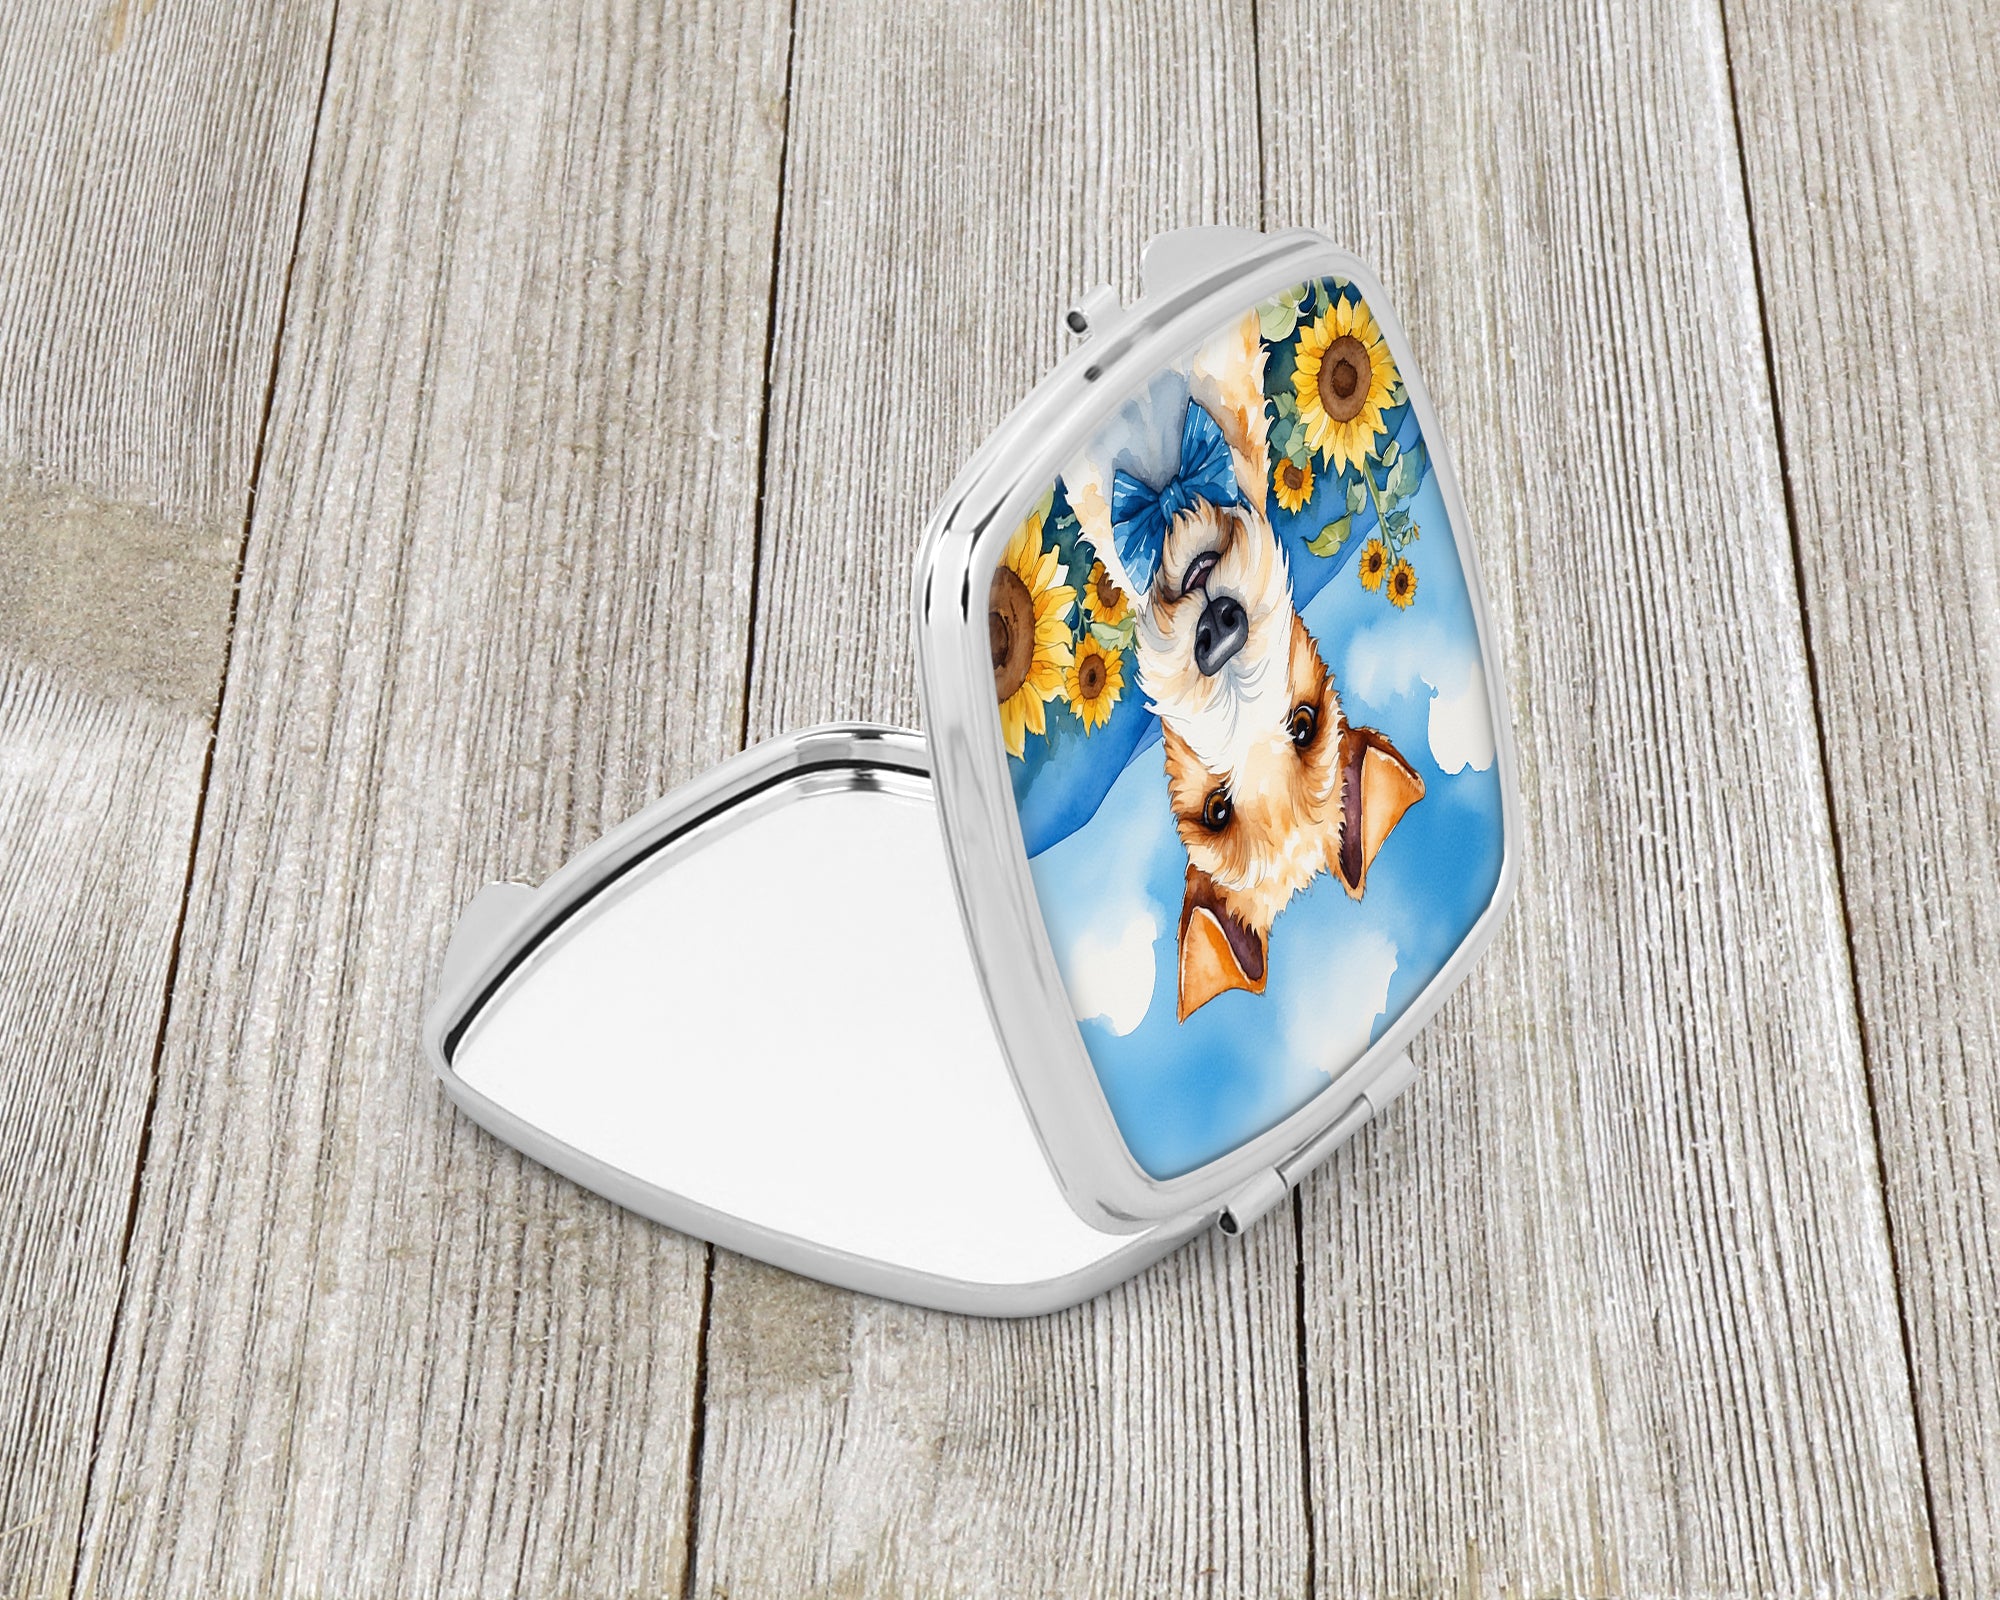 Fox Terrier in Sunflowers Compact Mirror